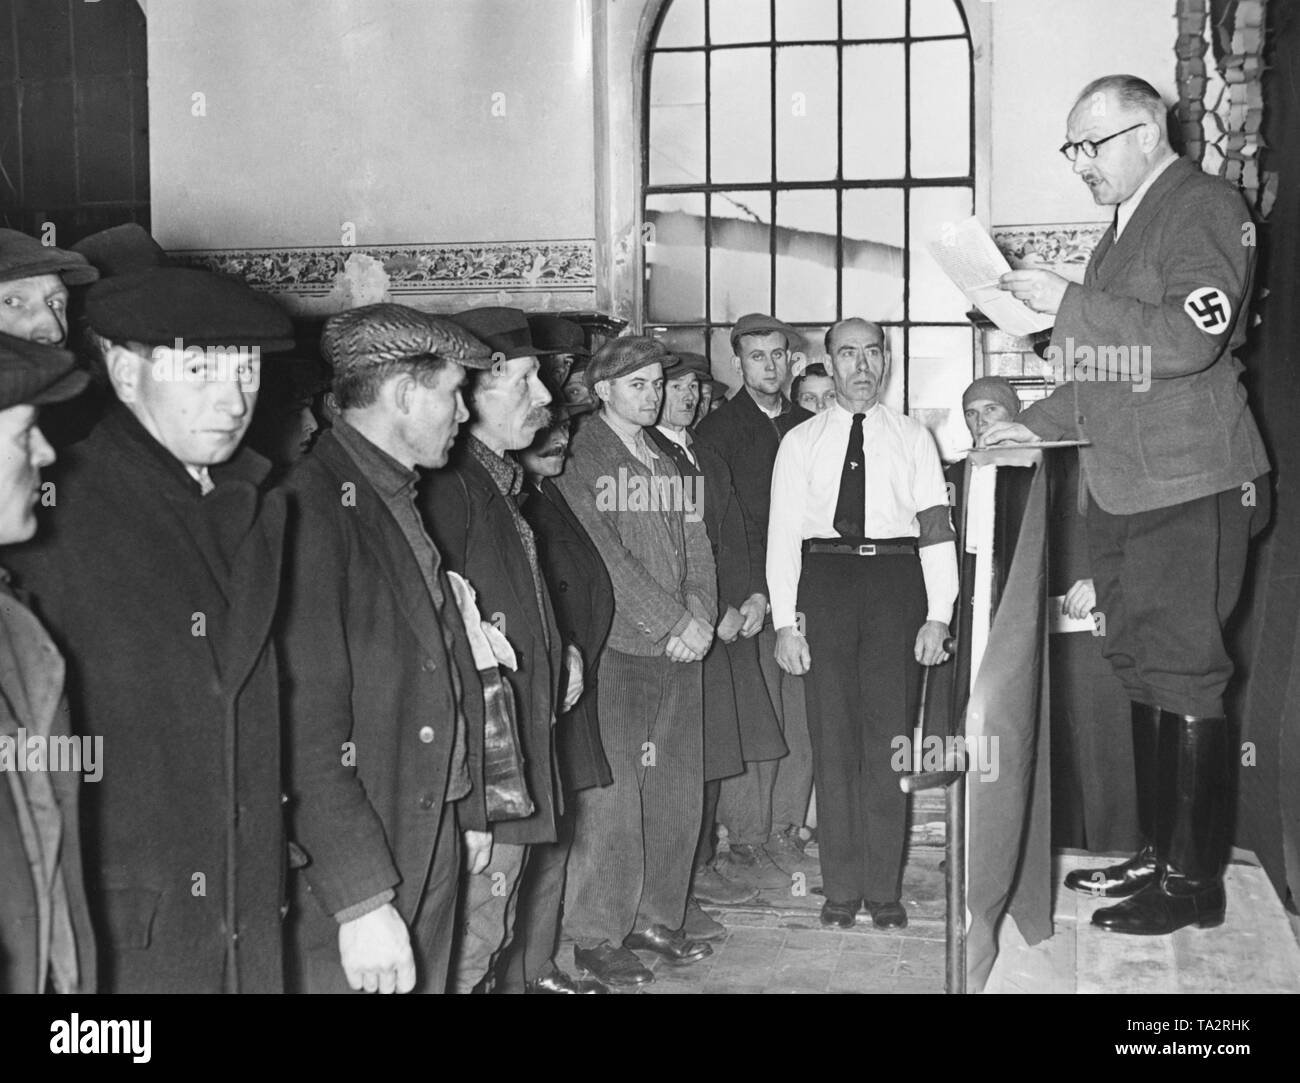 Before the upcoming Sudeten German by-elections, there is a company roll-call in the pit 'Richard'. The chairman of the company reminds employees of the importance of the elections. In the plebiscite, votes are cast concerning the annexation of the Sudetenland to the German Reich. Stock Photo